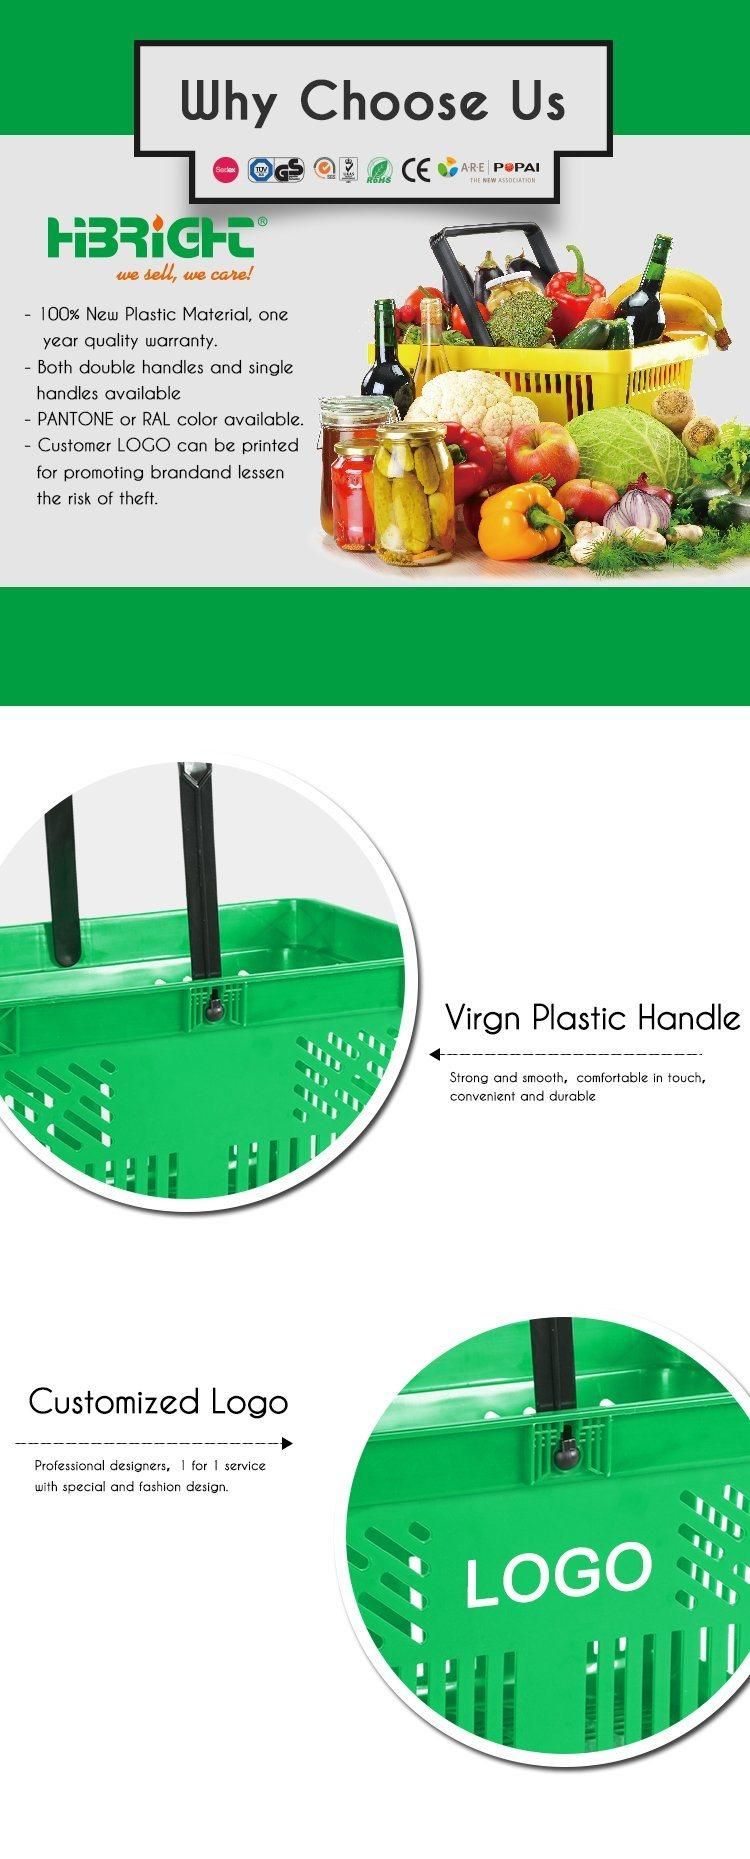 Wholesale Wire Handle Plastic Carry Shopping Basket